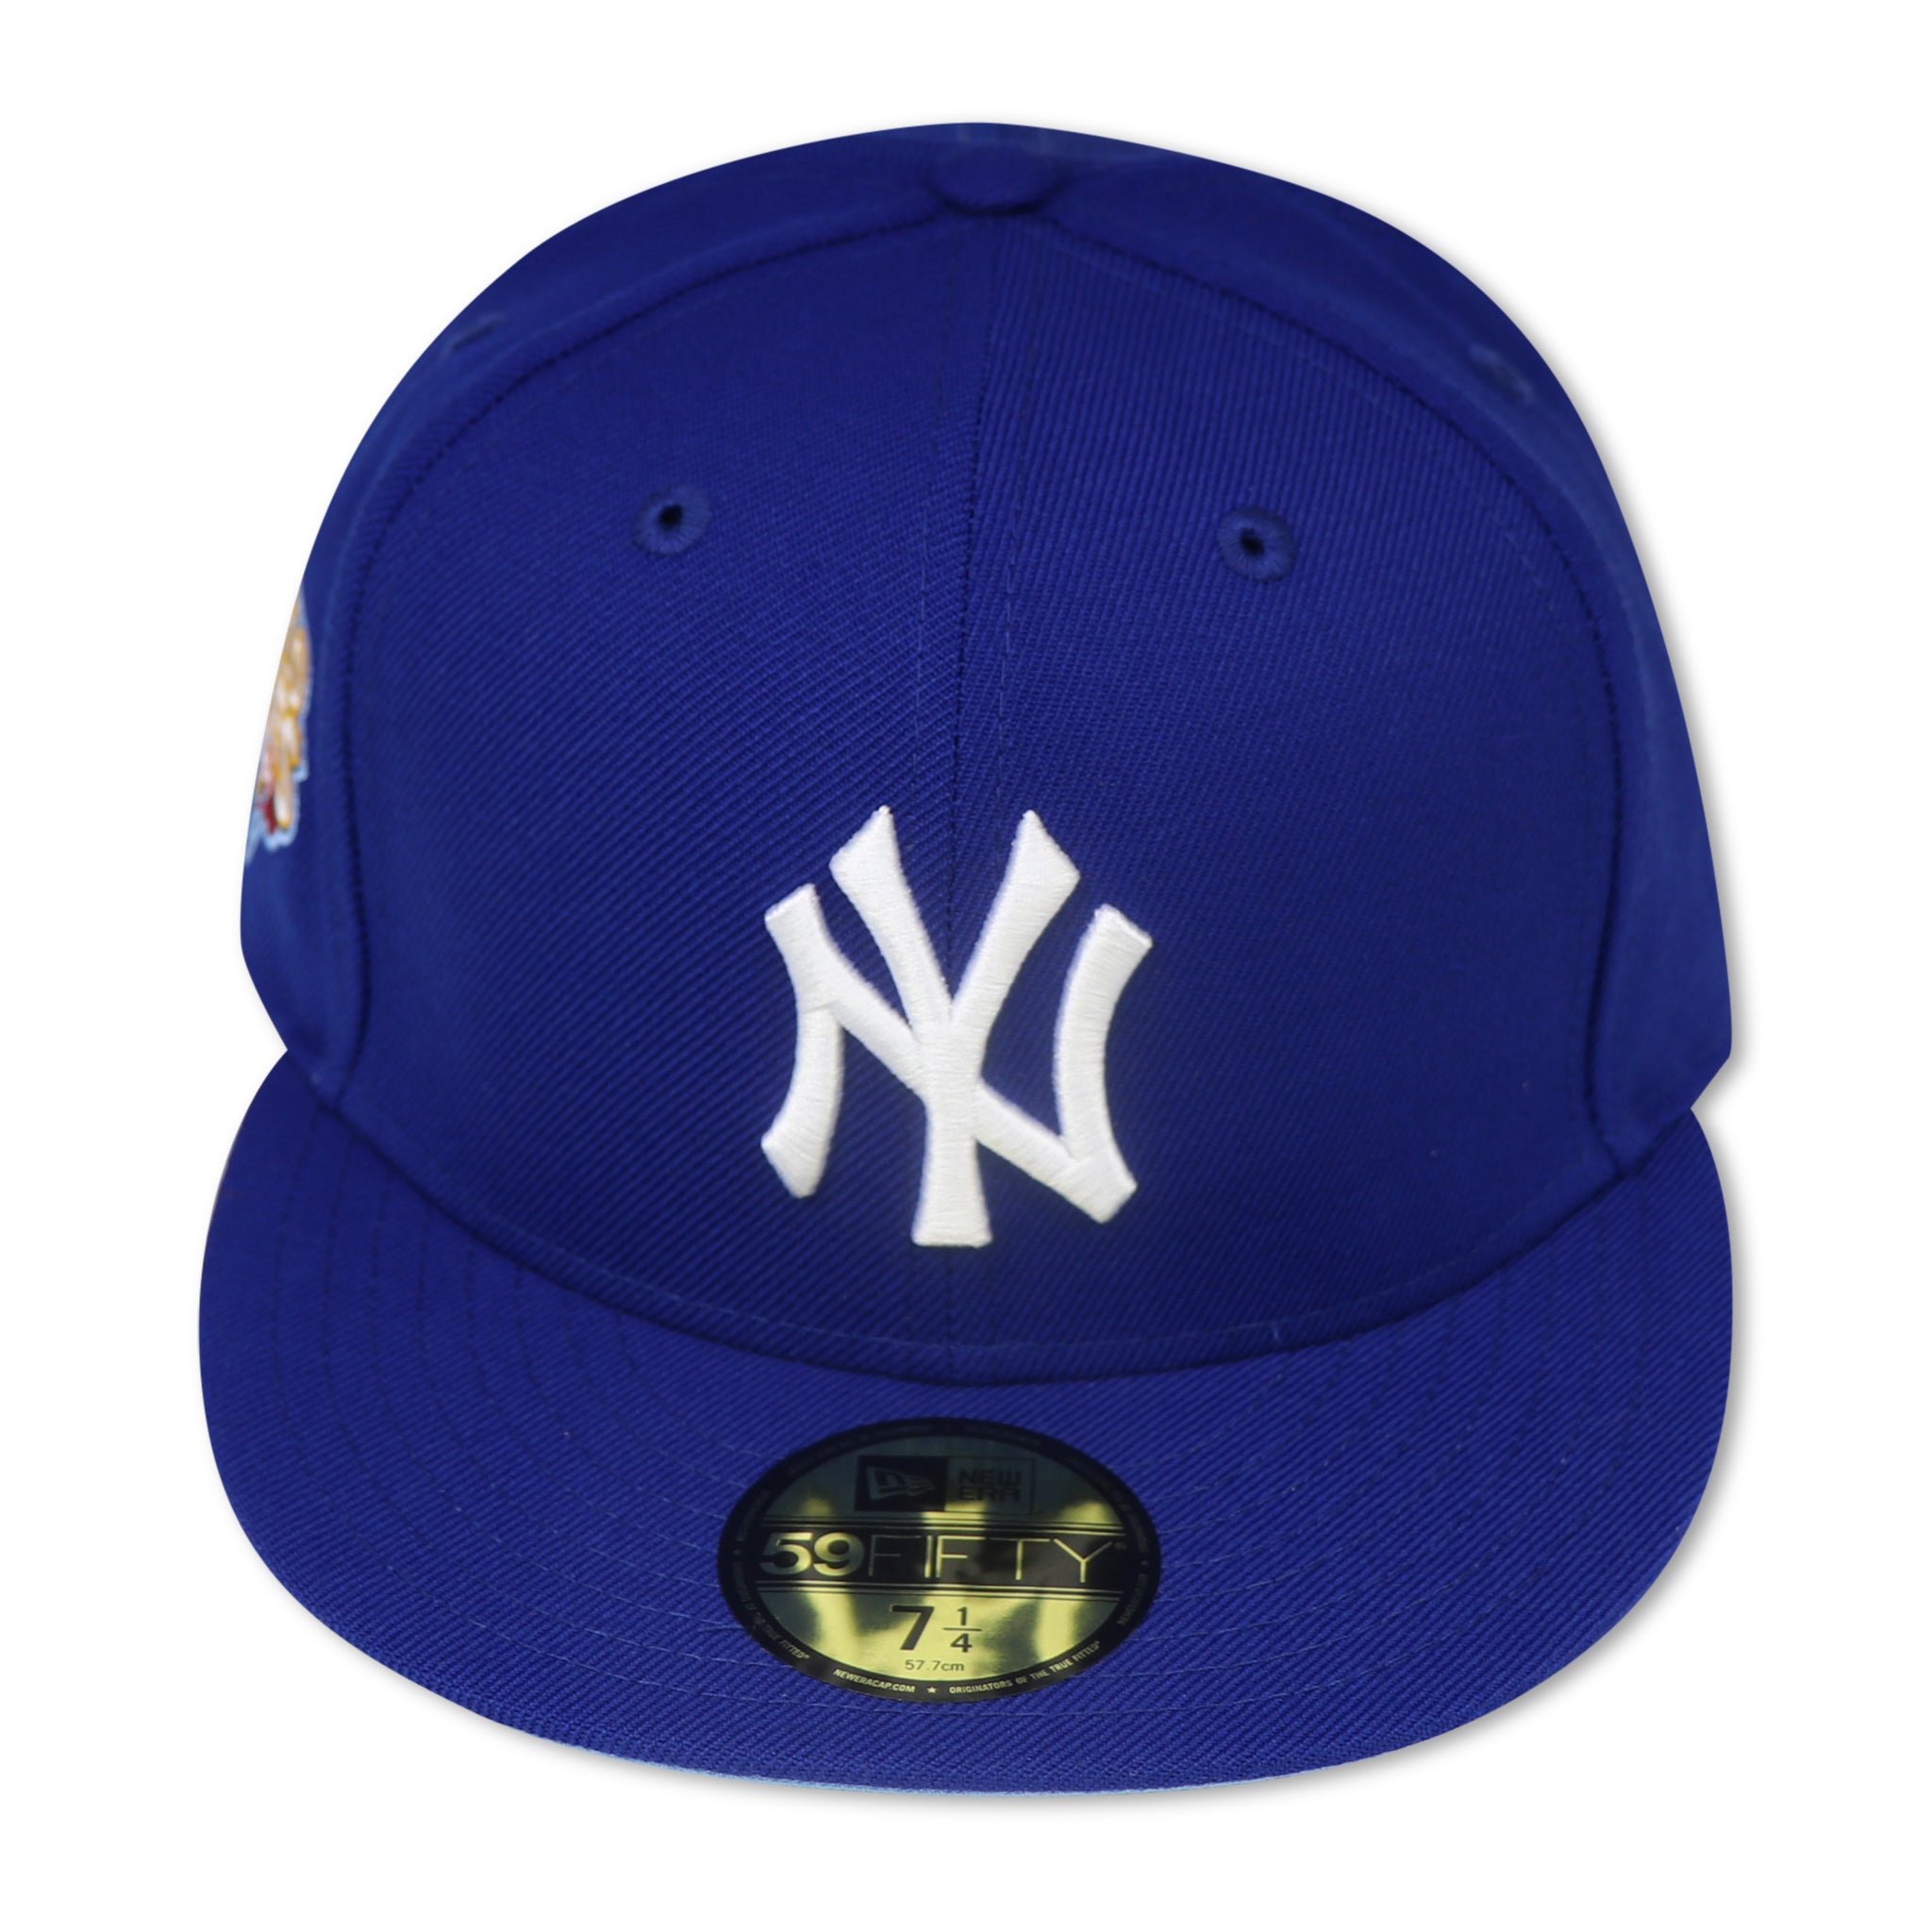 NEW YORK YANKEES (ROYAL) "2009 WORLDSERIES" NEW ERA 59FIFTY FITTED (SKY BLUE BOTTOM)